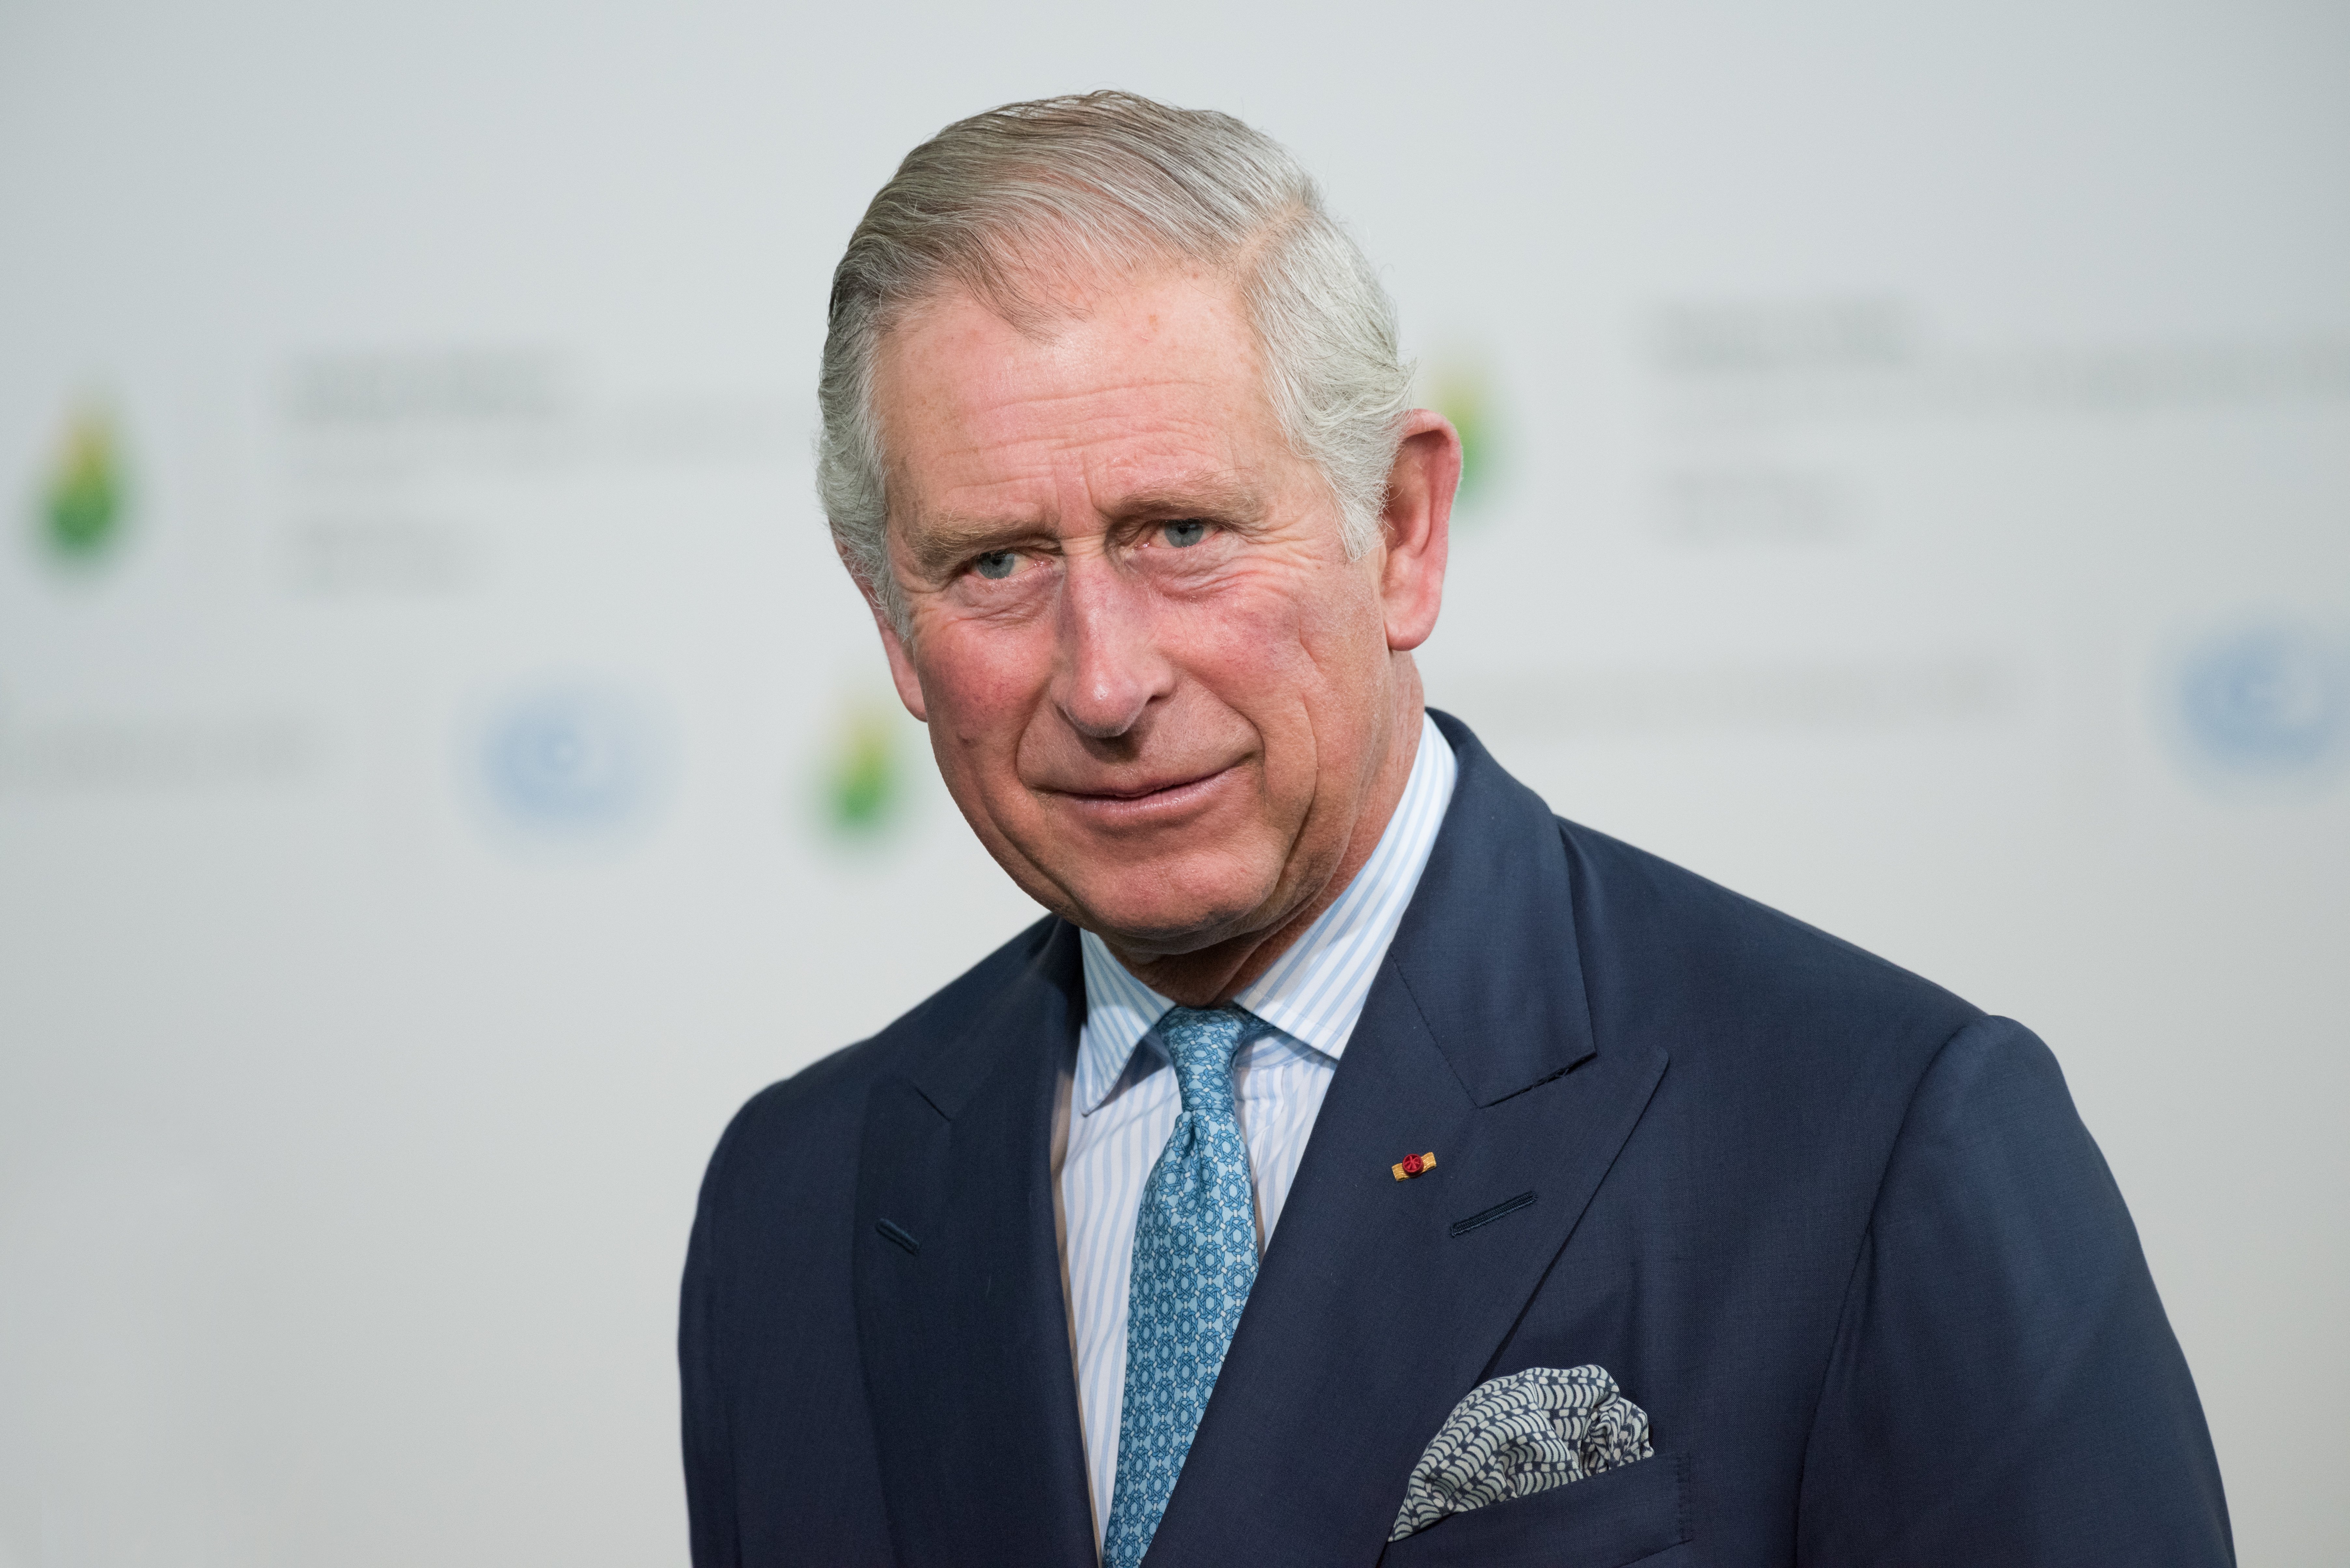 Prince Charles at the Paris COP21, United Nations conference on climate change in November 30, 2015 in Le Bourget, near Paris, France | Photo: Shutterstock